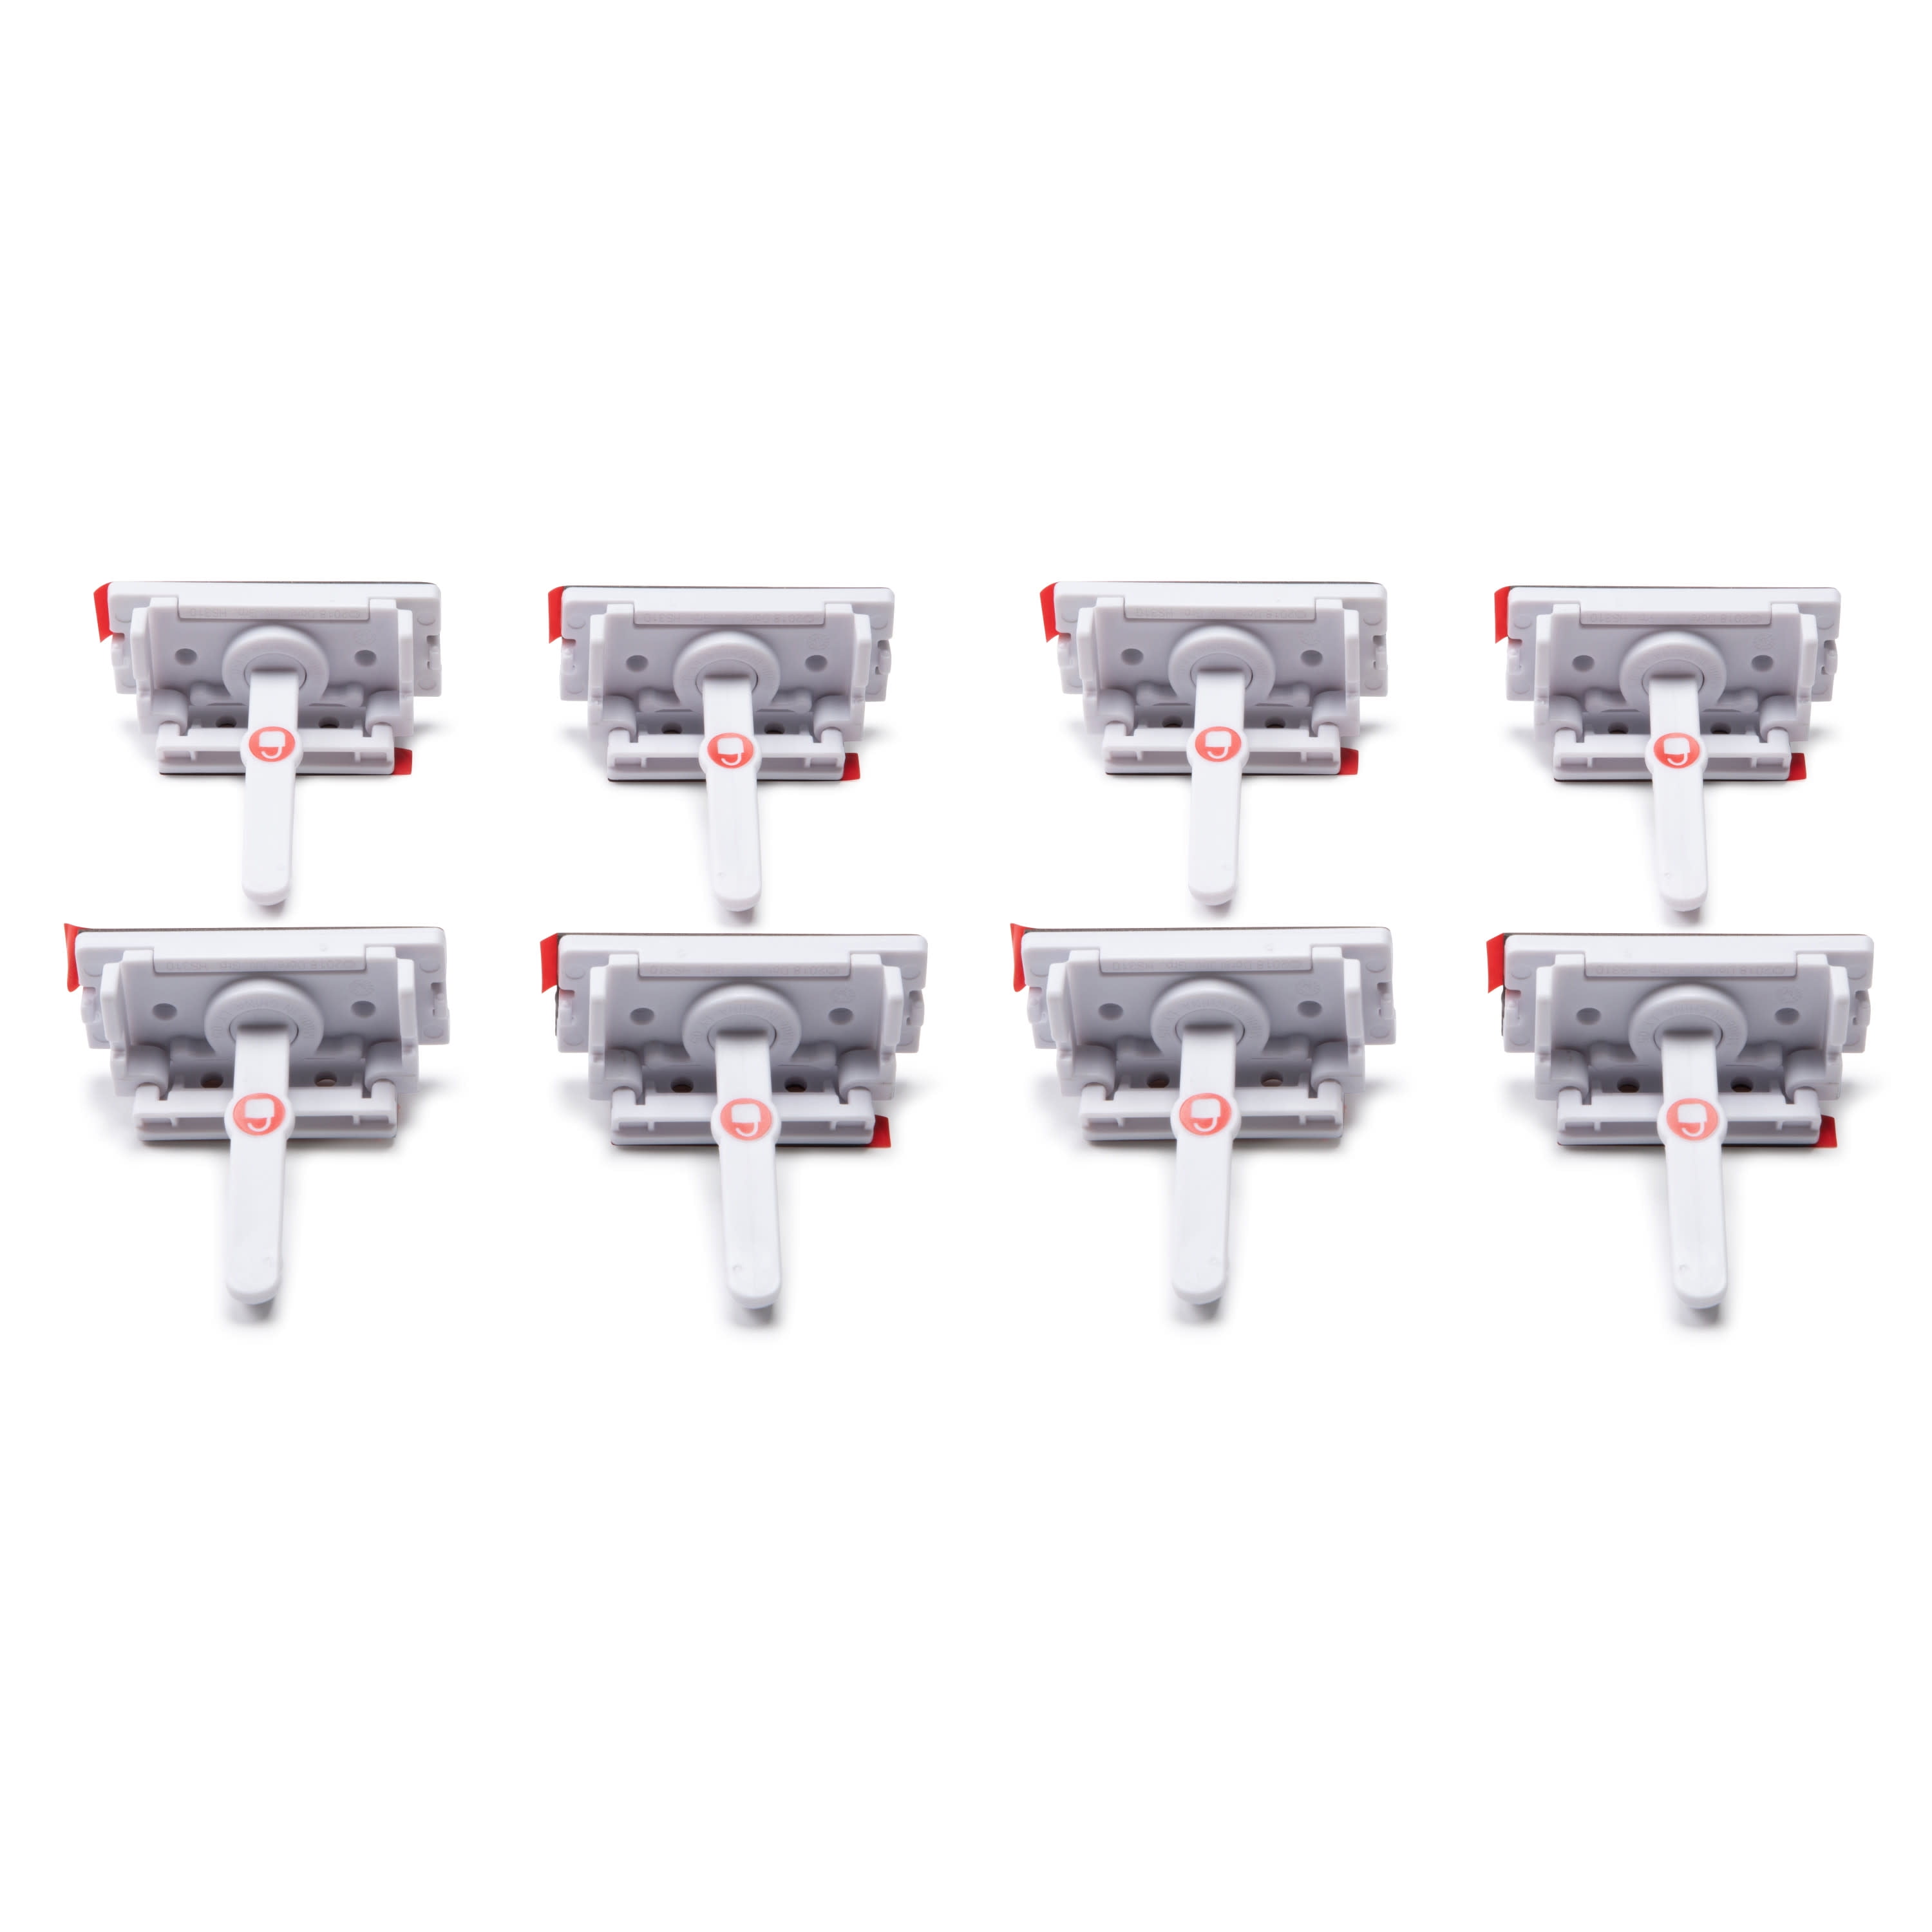 Safety 1st Adhesive Cabinet Latch (12pk), 1 Piece - Gerbes Super